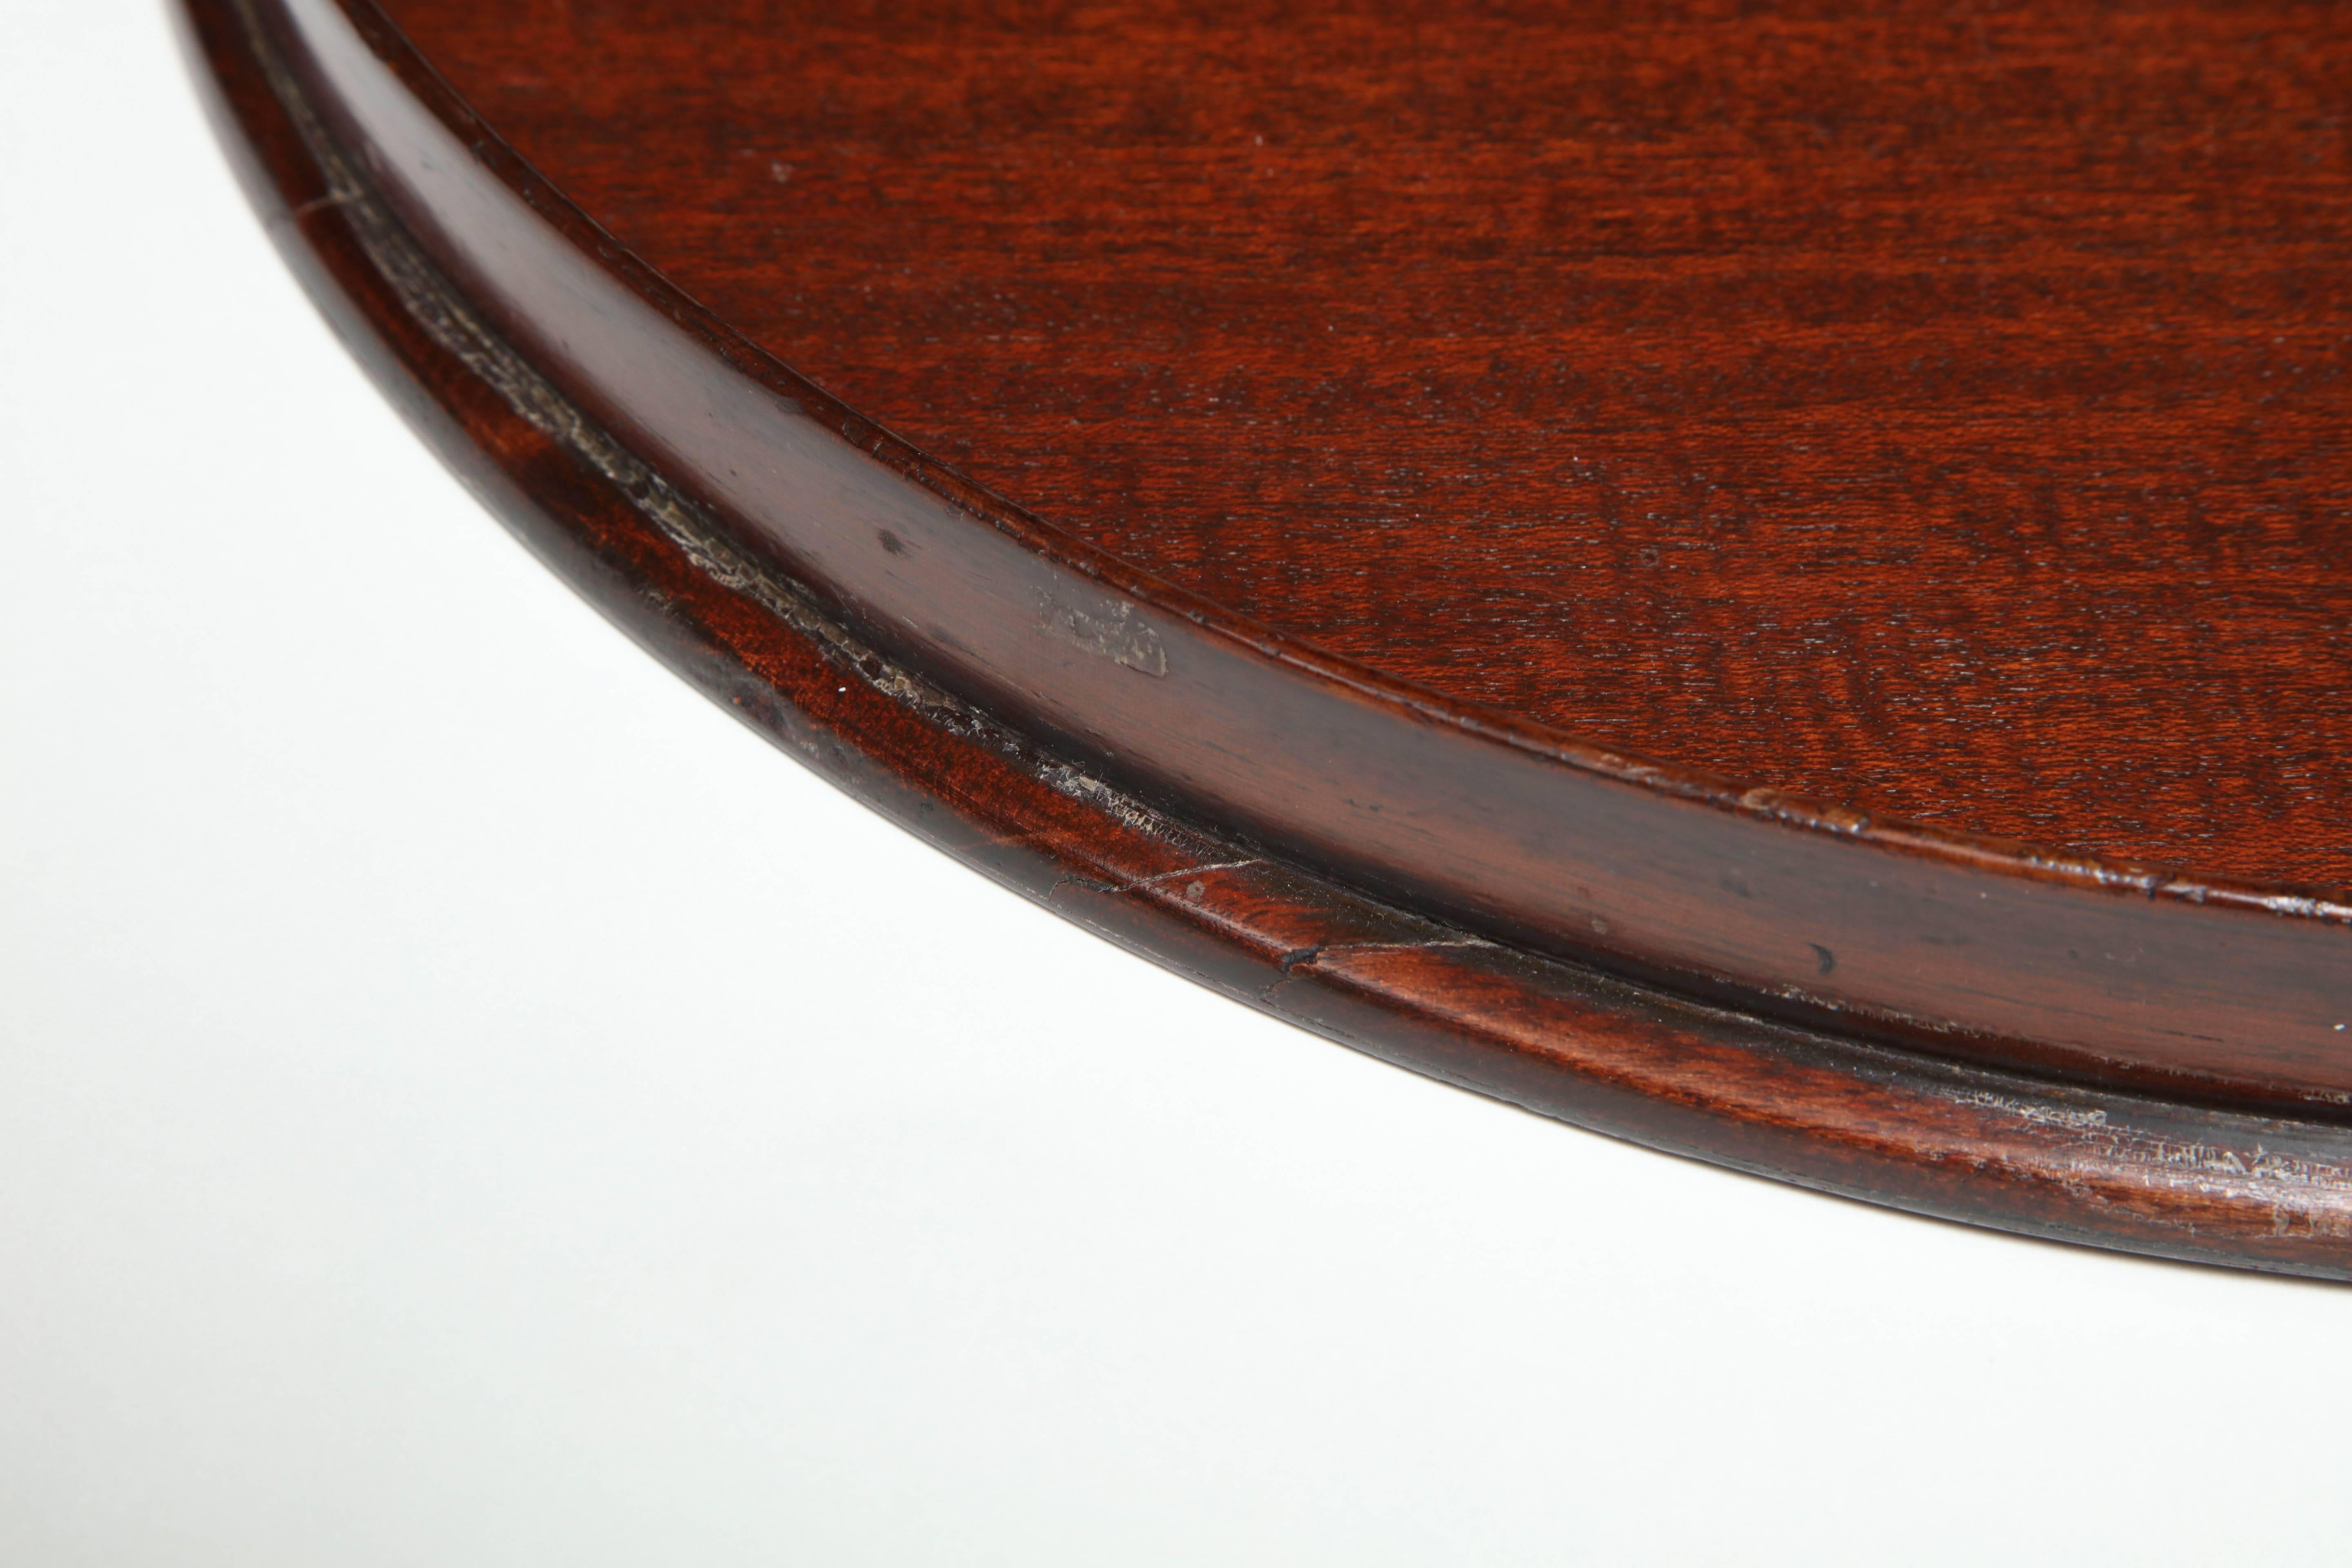 American Edwardian Sheraton-Style Round Wood Serving Tray with Silver Plated Handles